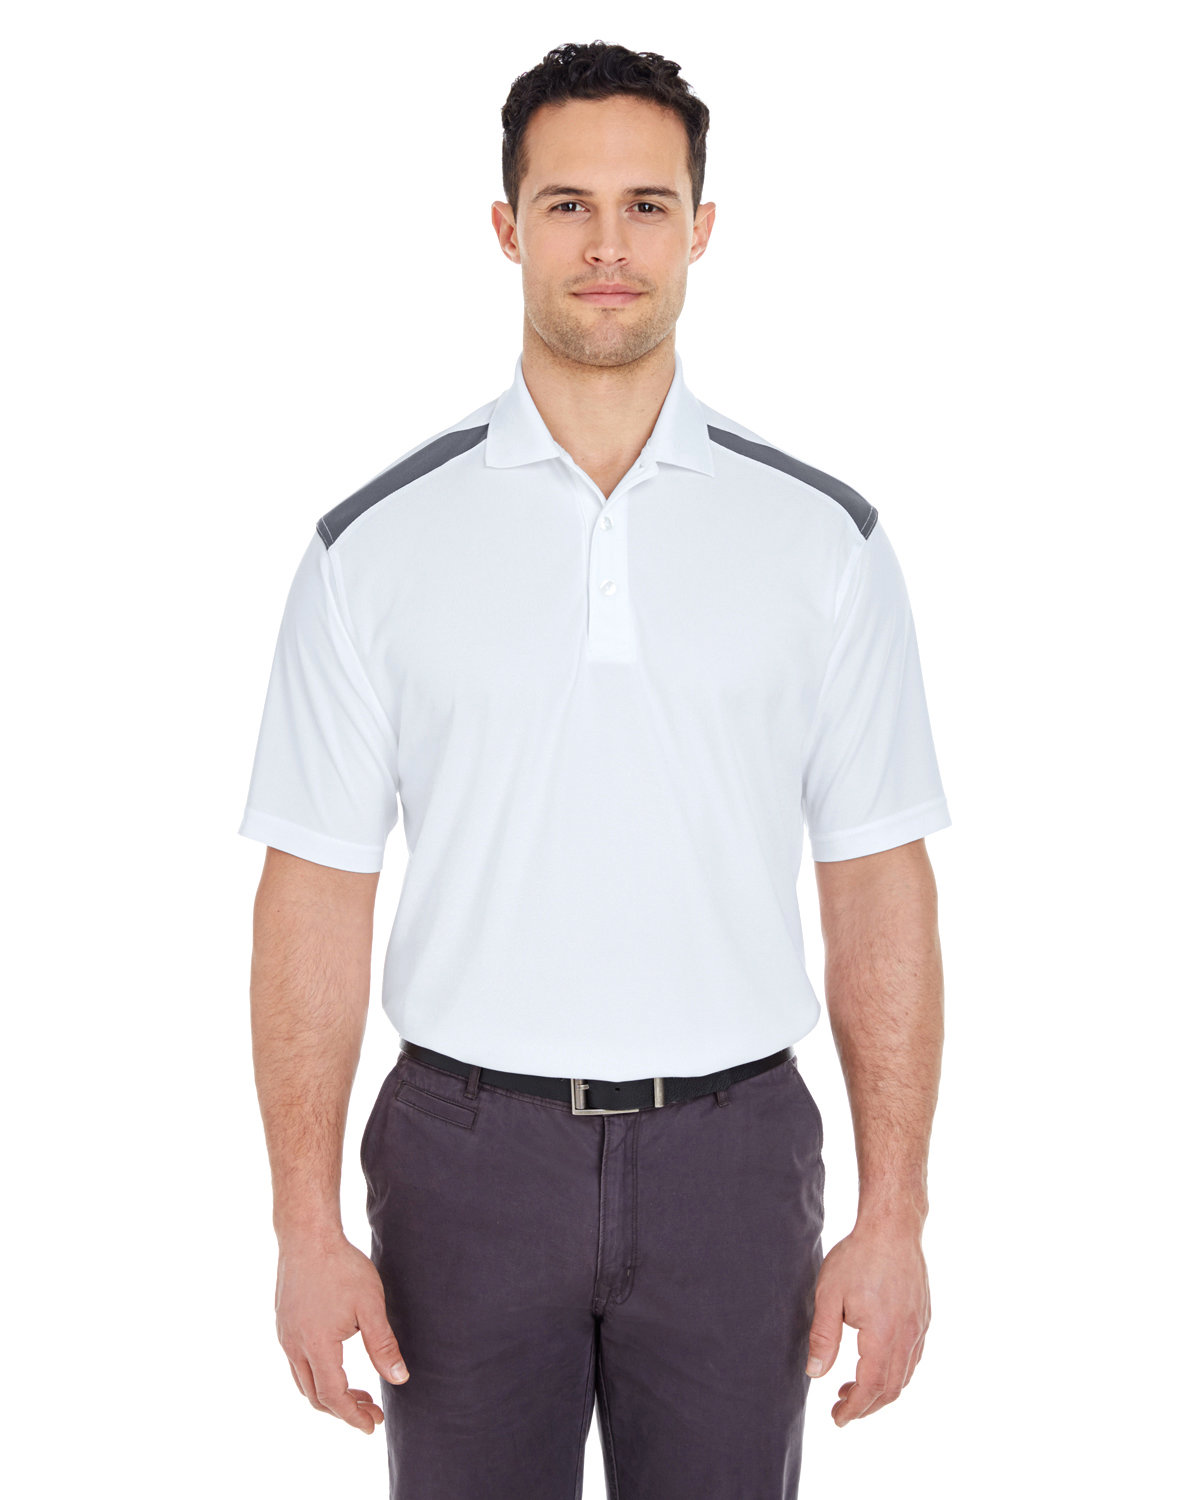 Adult Cool & Dry Two-Tone Mesh Pique Polo-UltraClub